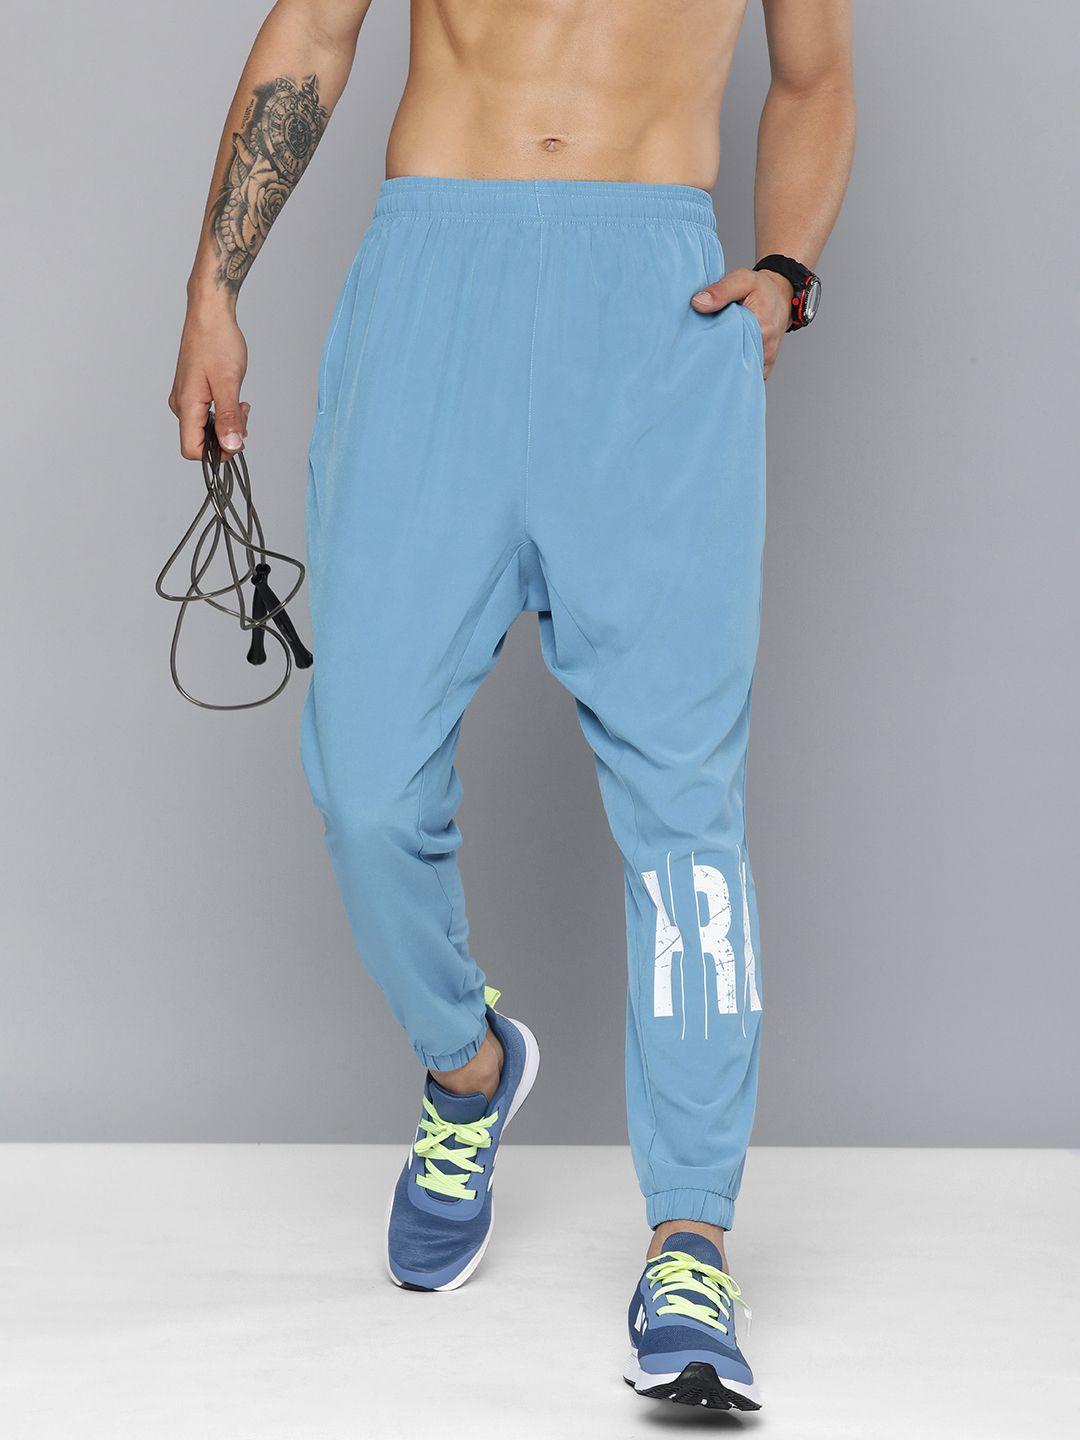 hrx-by-hrithik-roshan-men-antimicrobial-finish-rapid-dry-training-joggers-track-pants